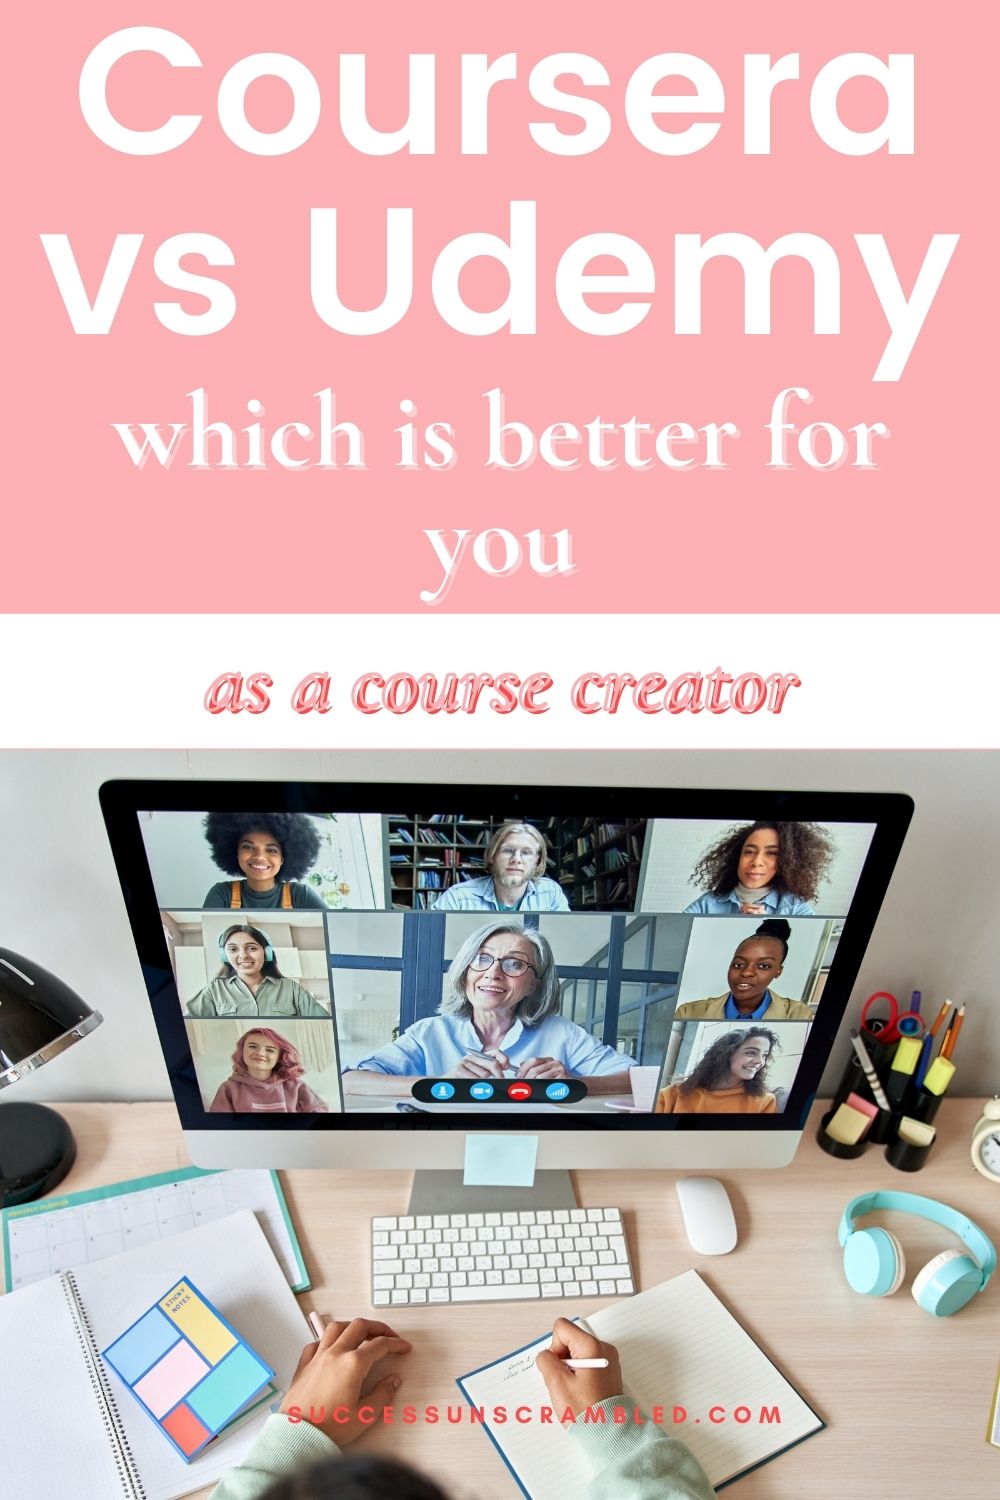 photo of students attending an online course on Udemy or Coursera